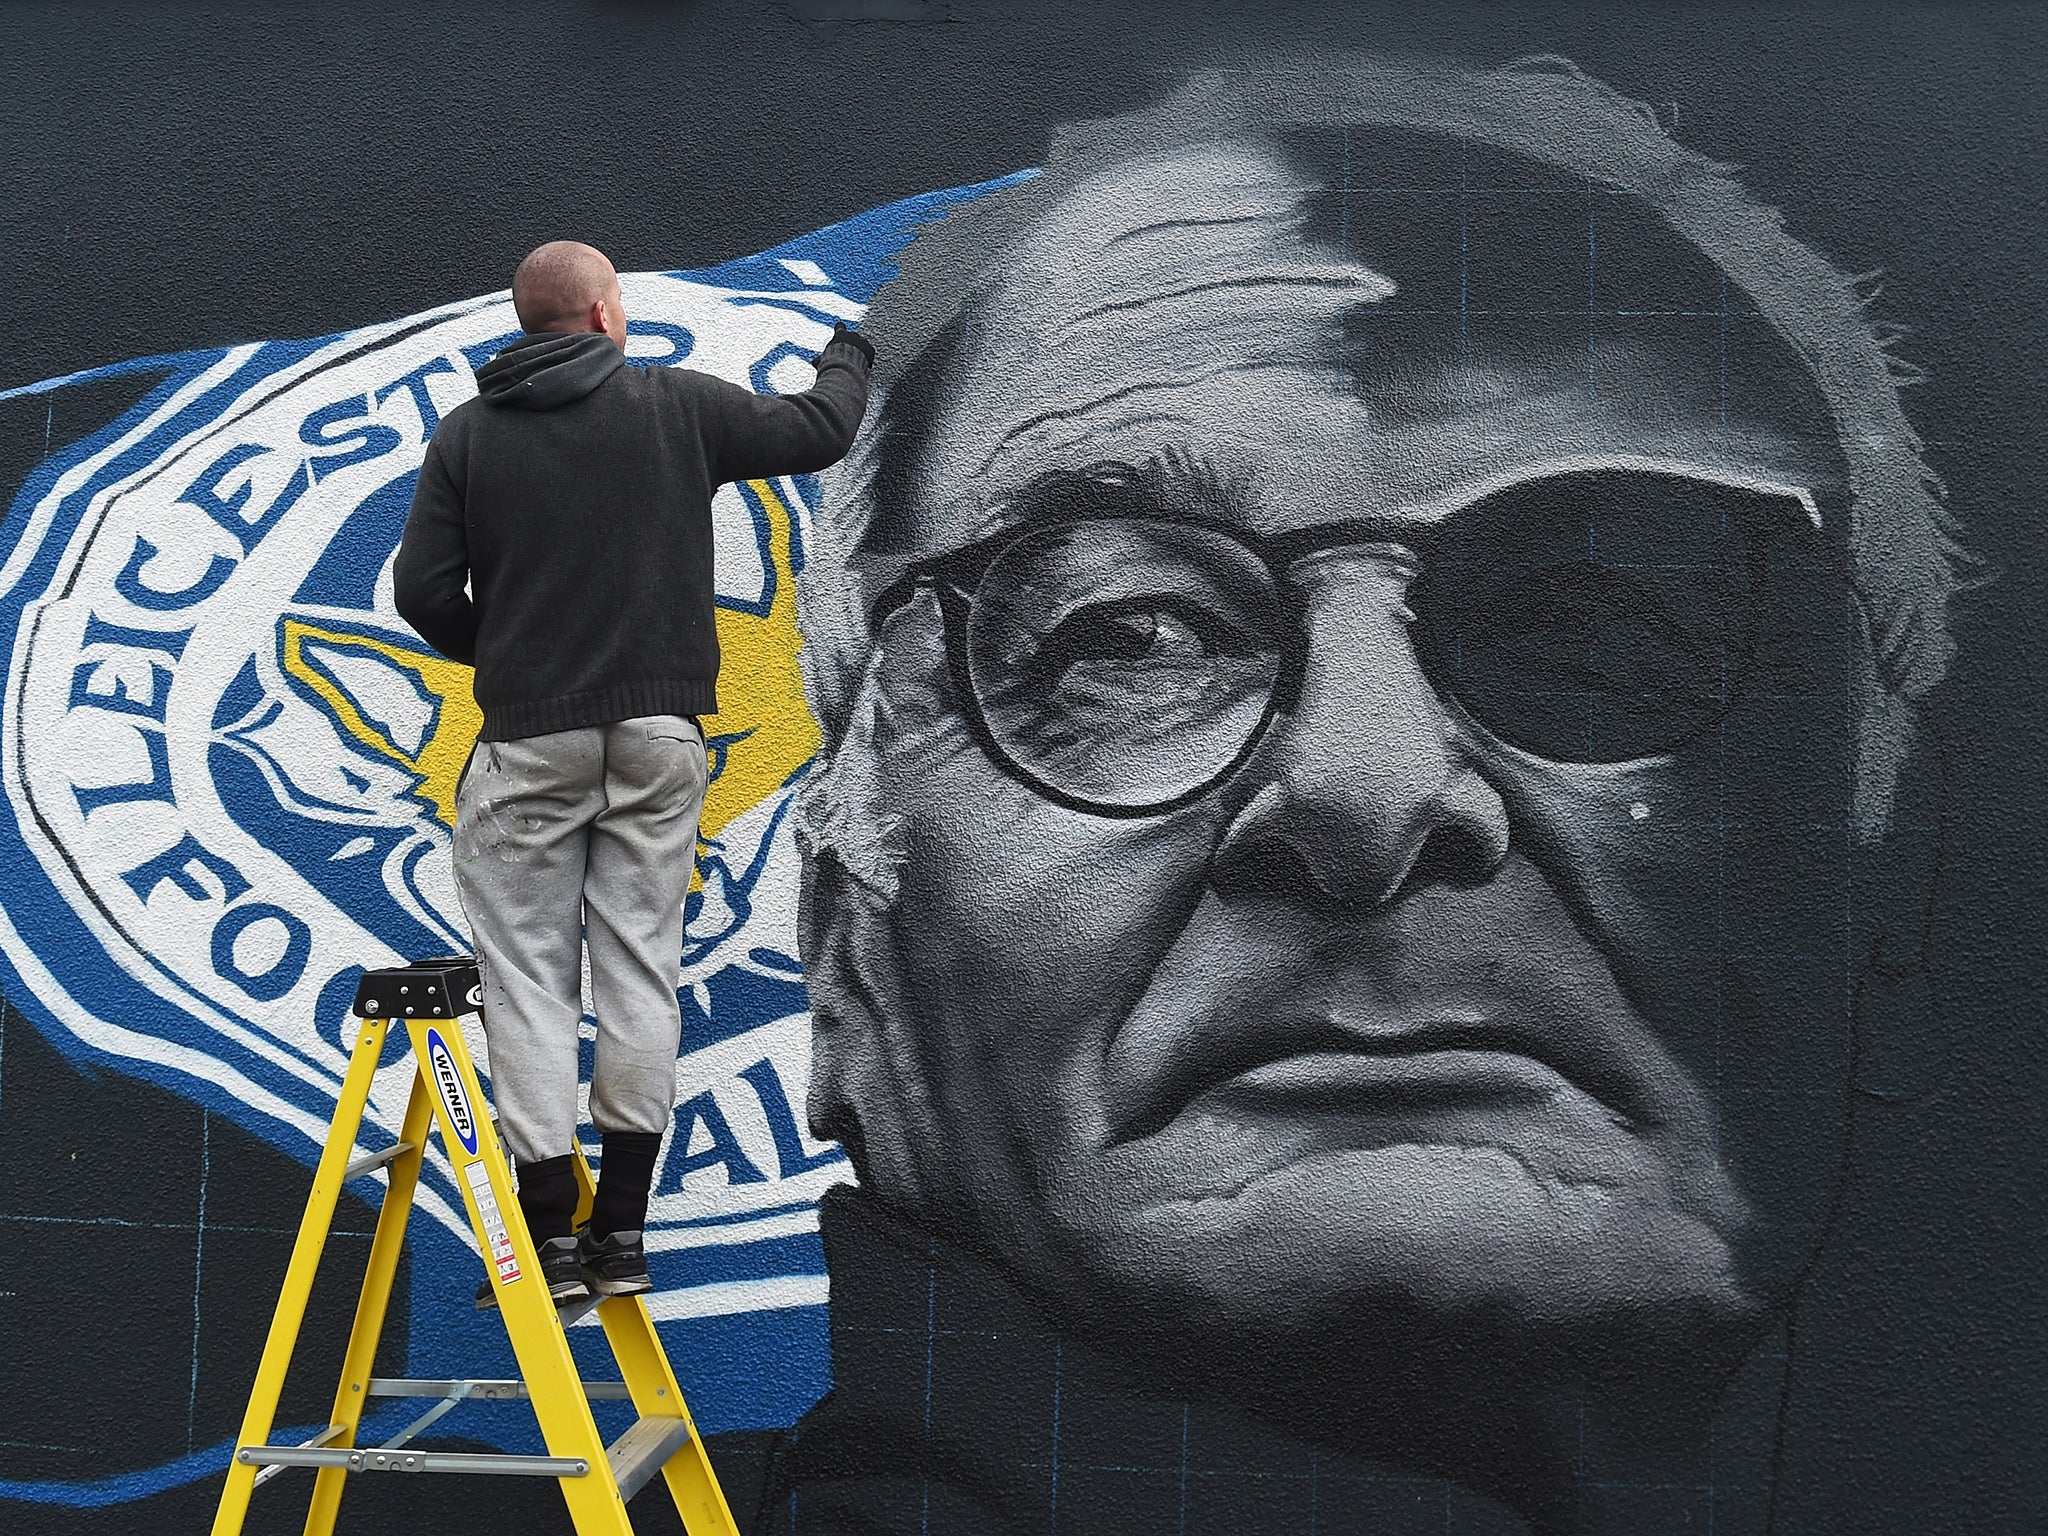 Ranieri has won the hearts of Leicester's supporters